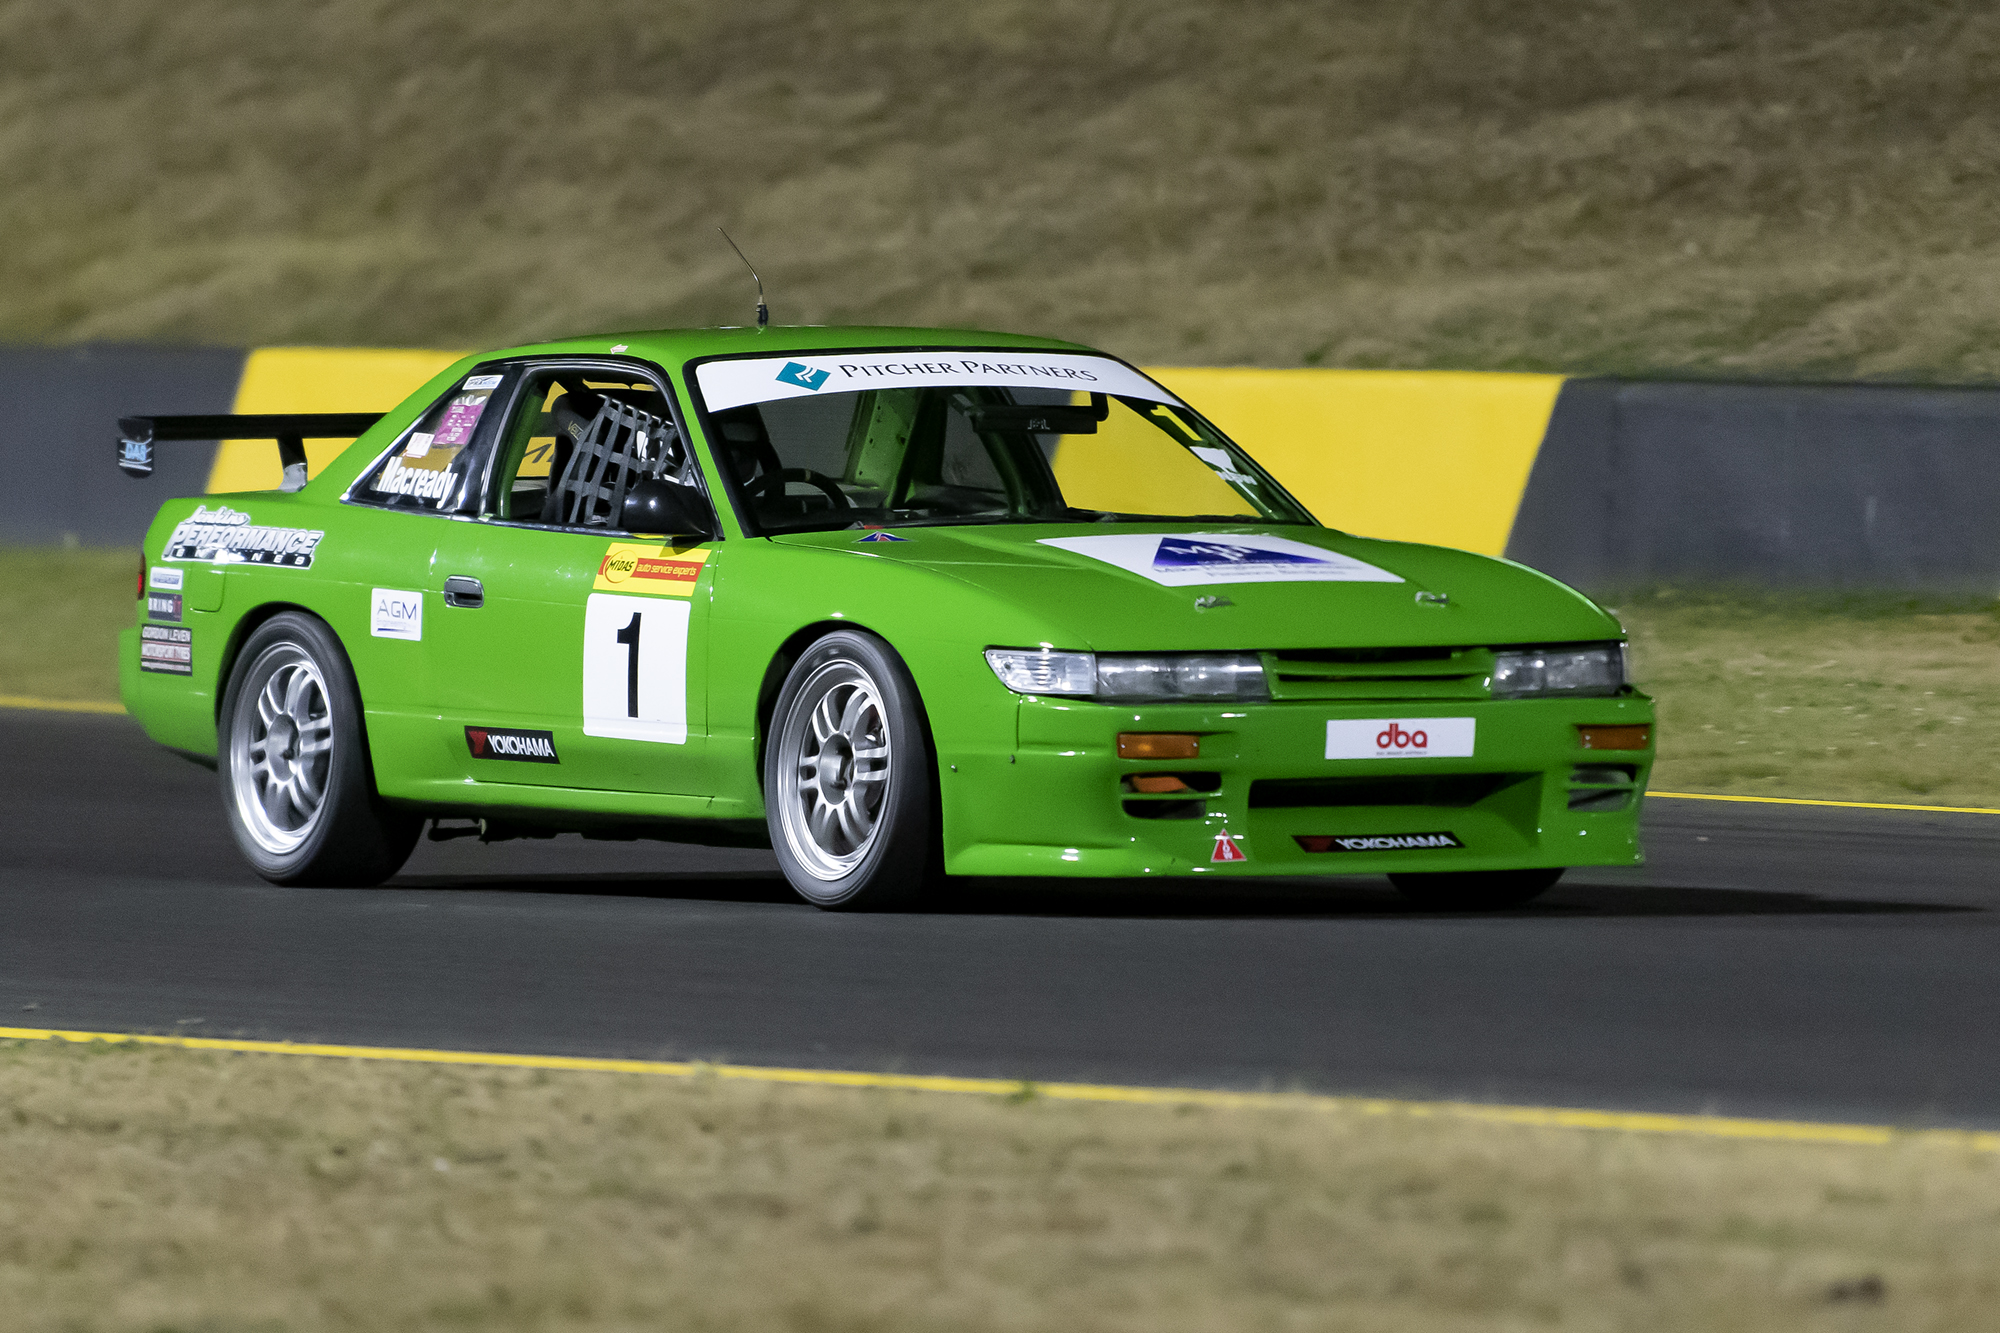 nsw motor race championship delivers fierce competition in sydney